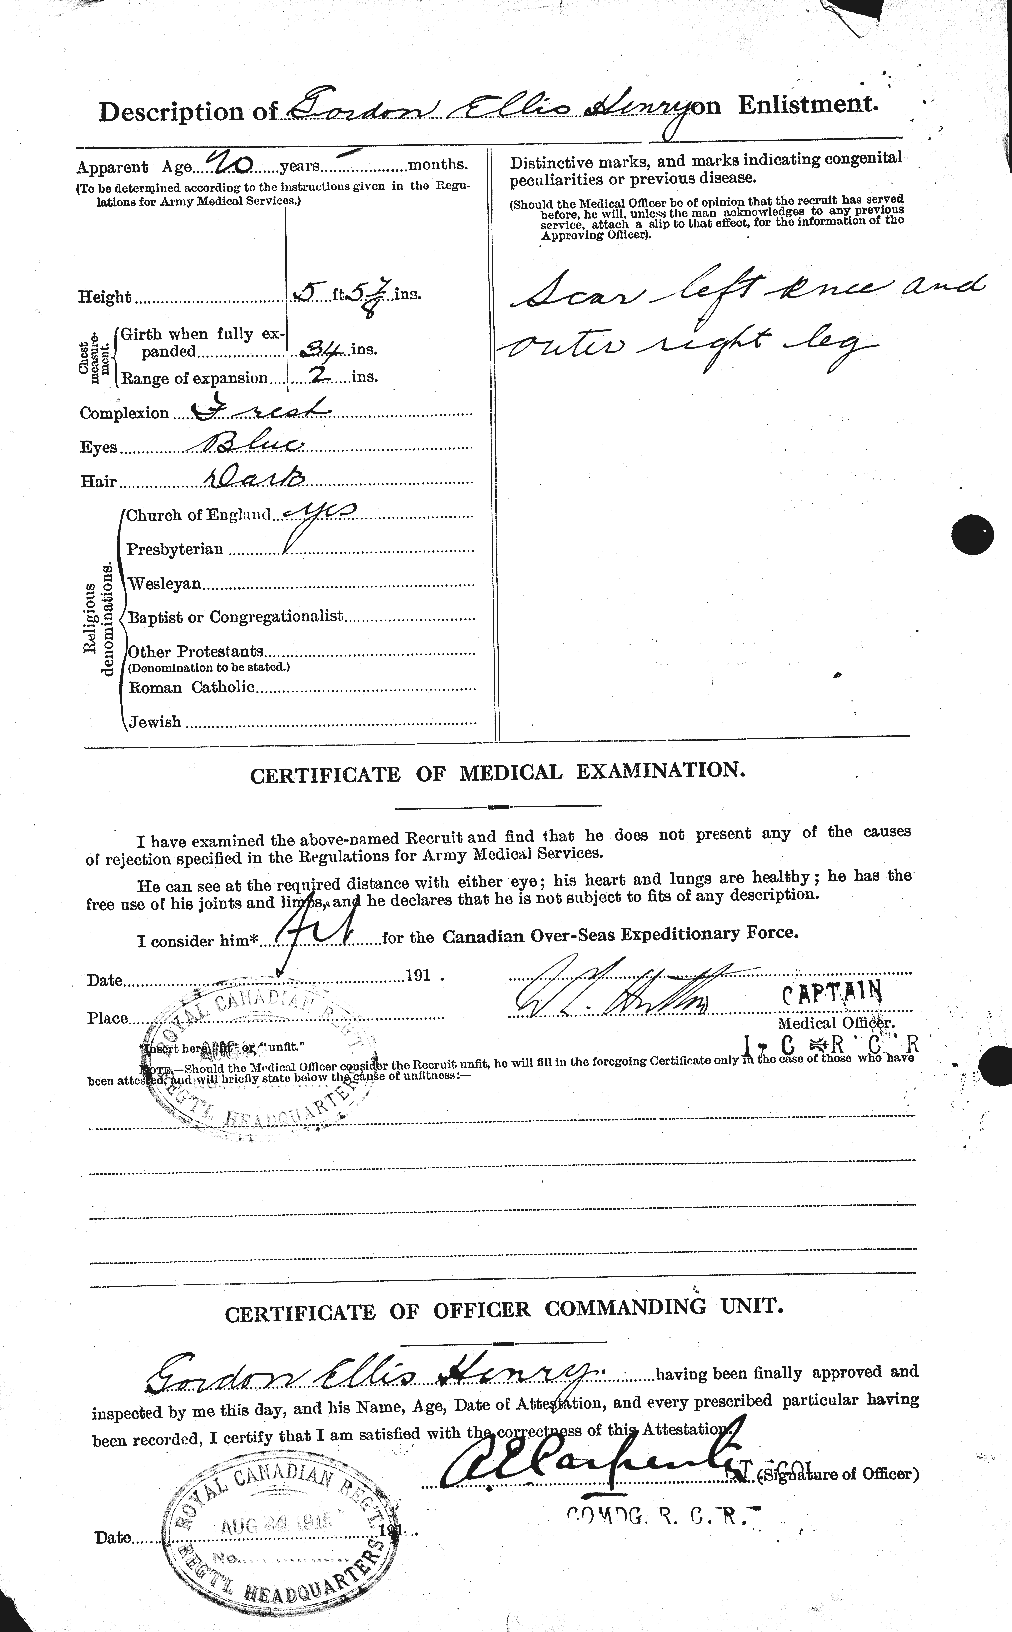 Personnel Records of the First World War - CEF 391423b